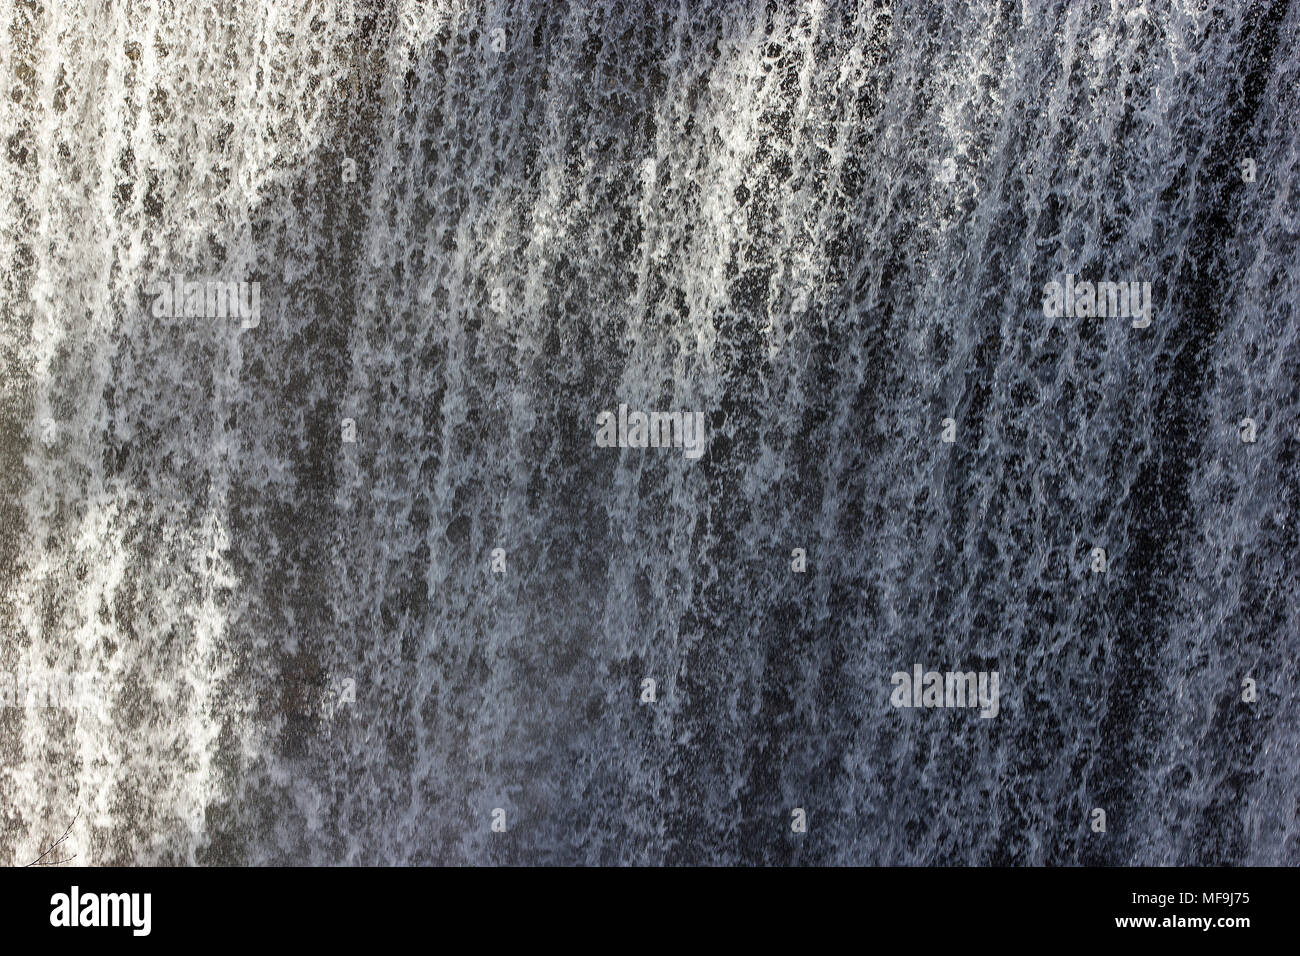 the artificial dam of the 'Lake of Fairies' during Spring, Lago delle Fate, Macugnaga, Italy, detail Stock Photo